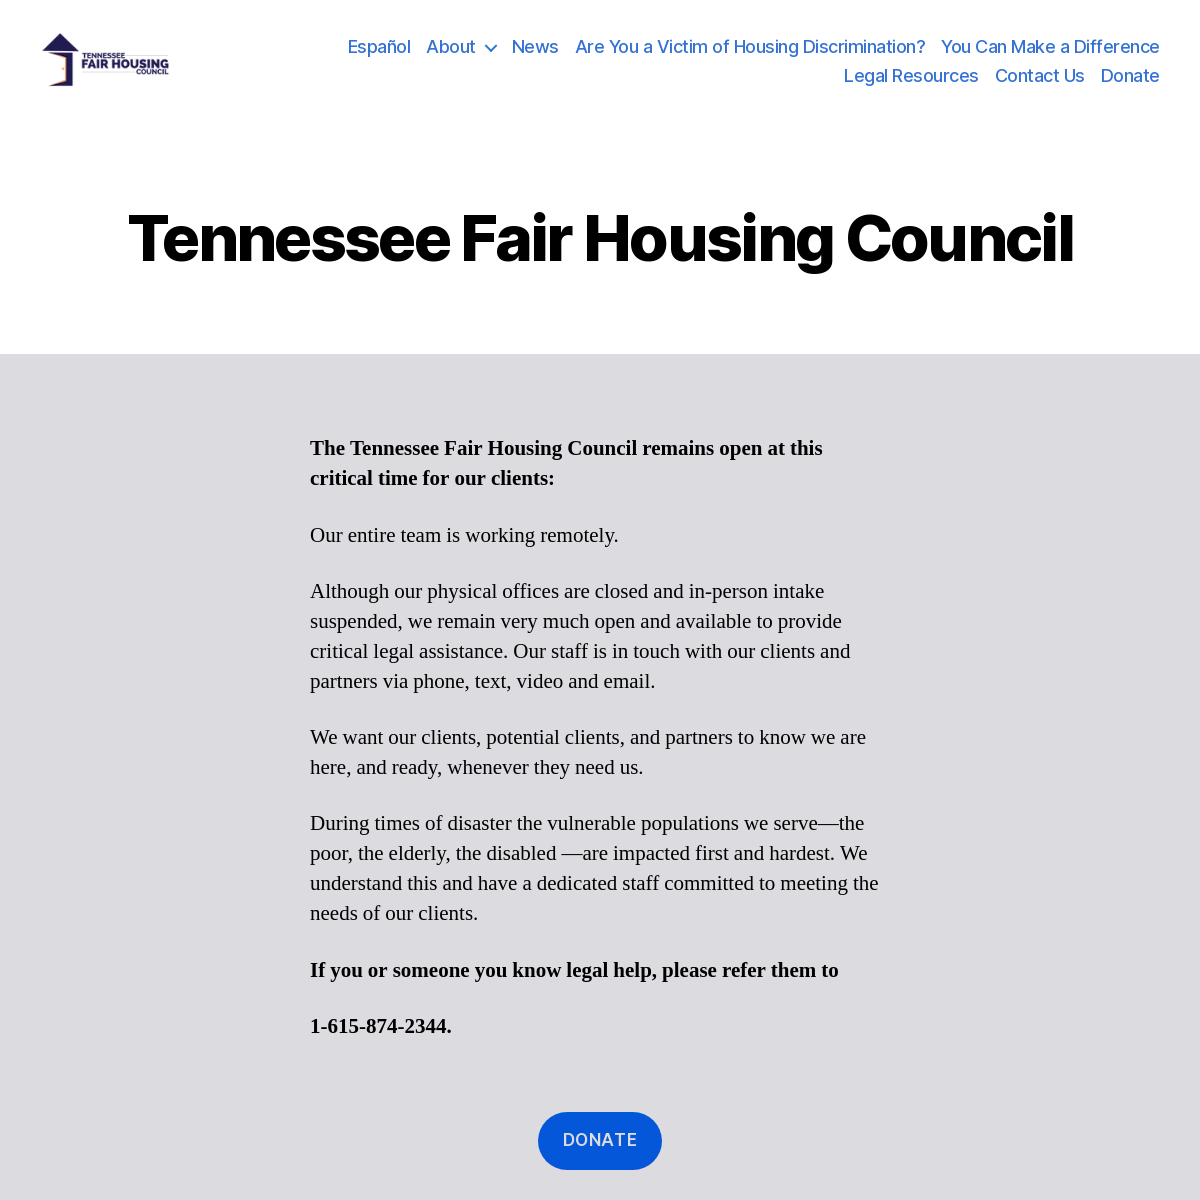 A complete backup of fairhousing.com